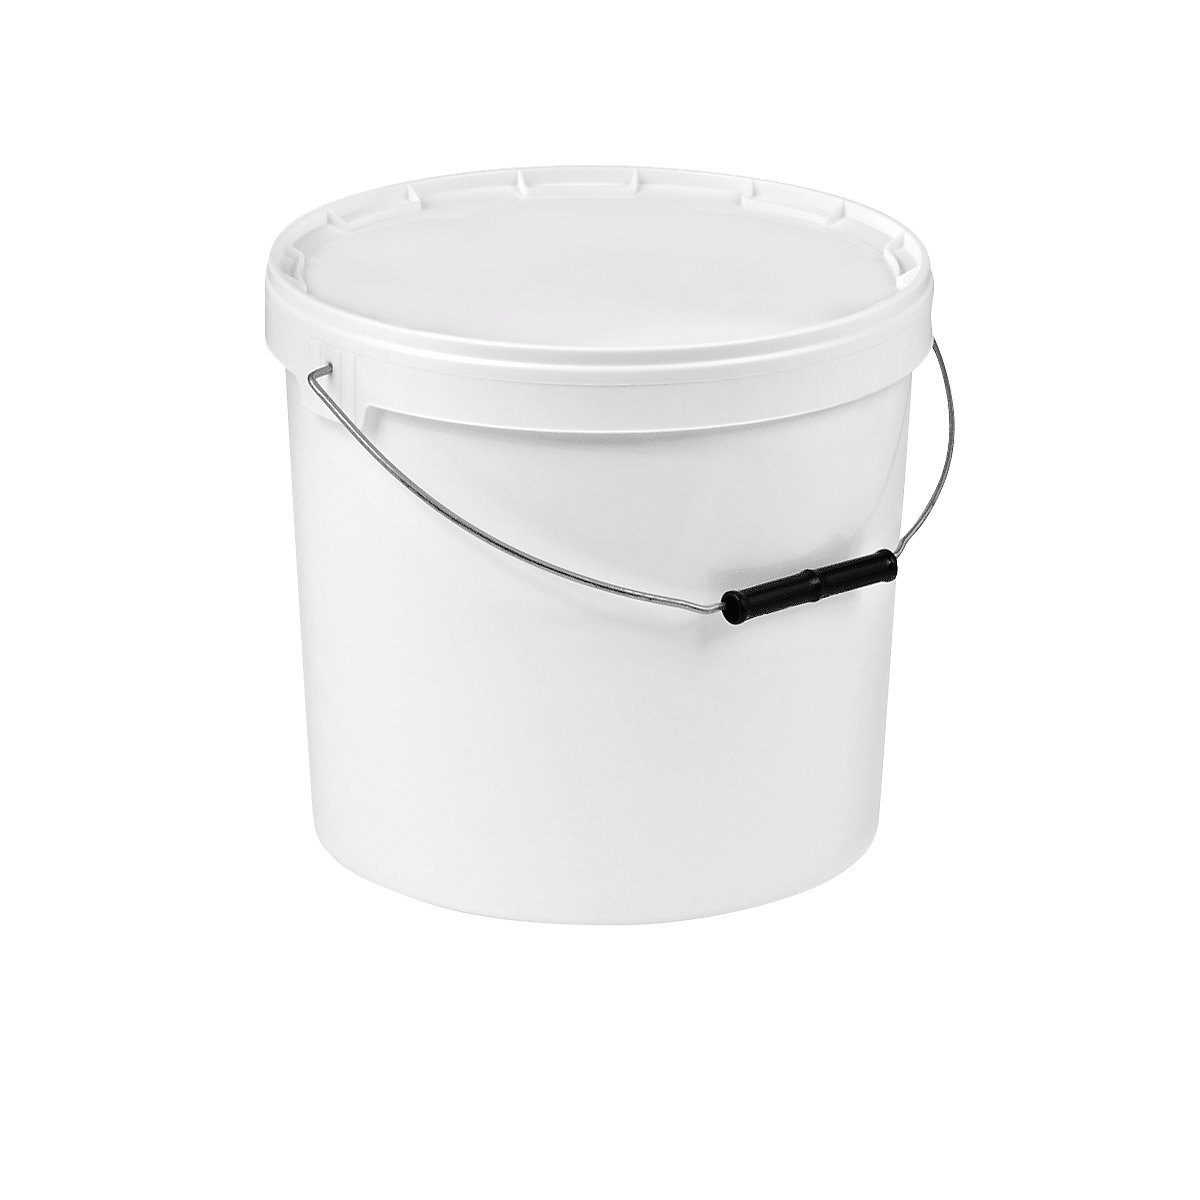 Bucket with lid – eurokraft basic, suitable for foodstuffs, 10+ items, capacity 12 l-3